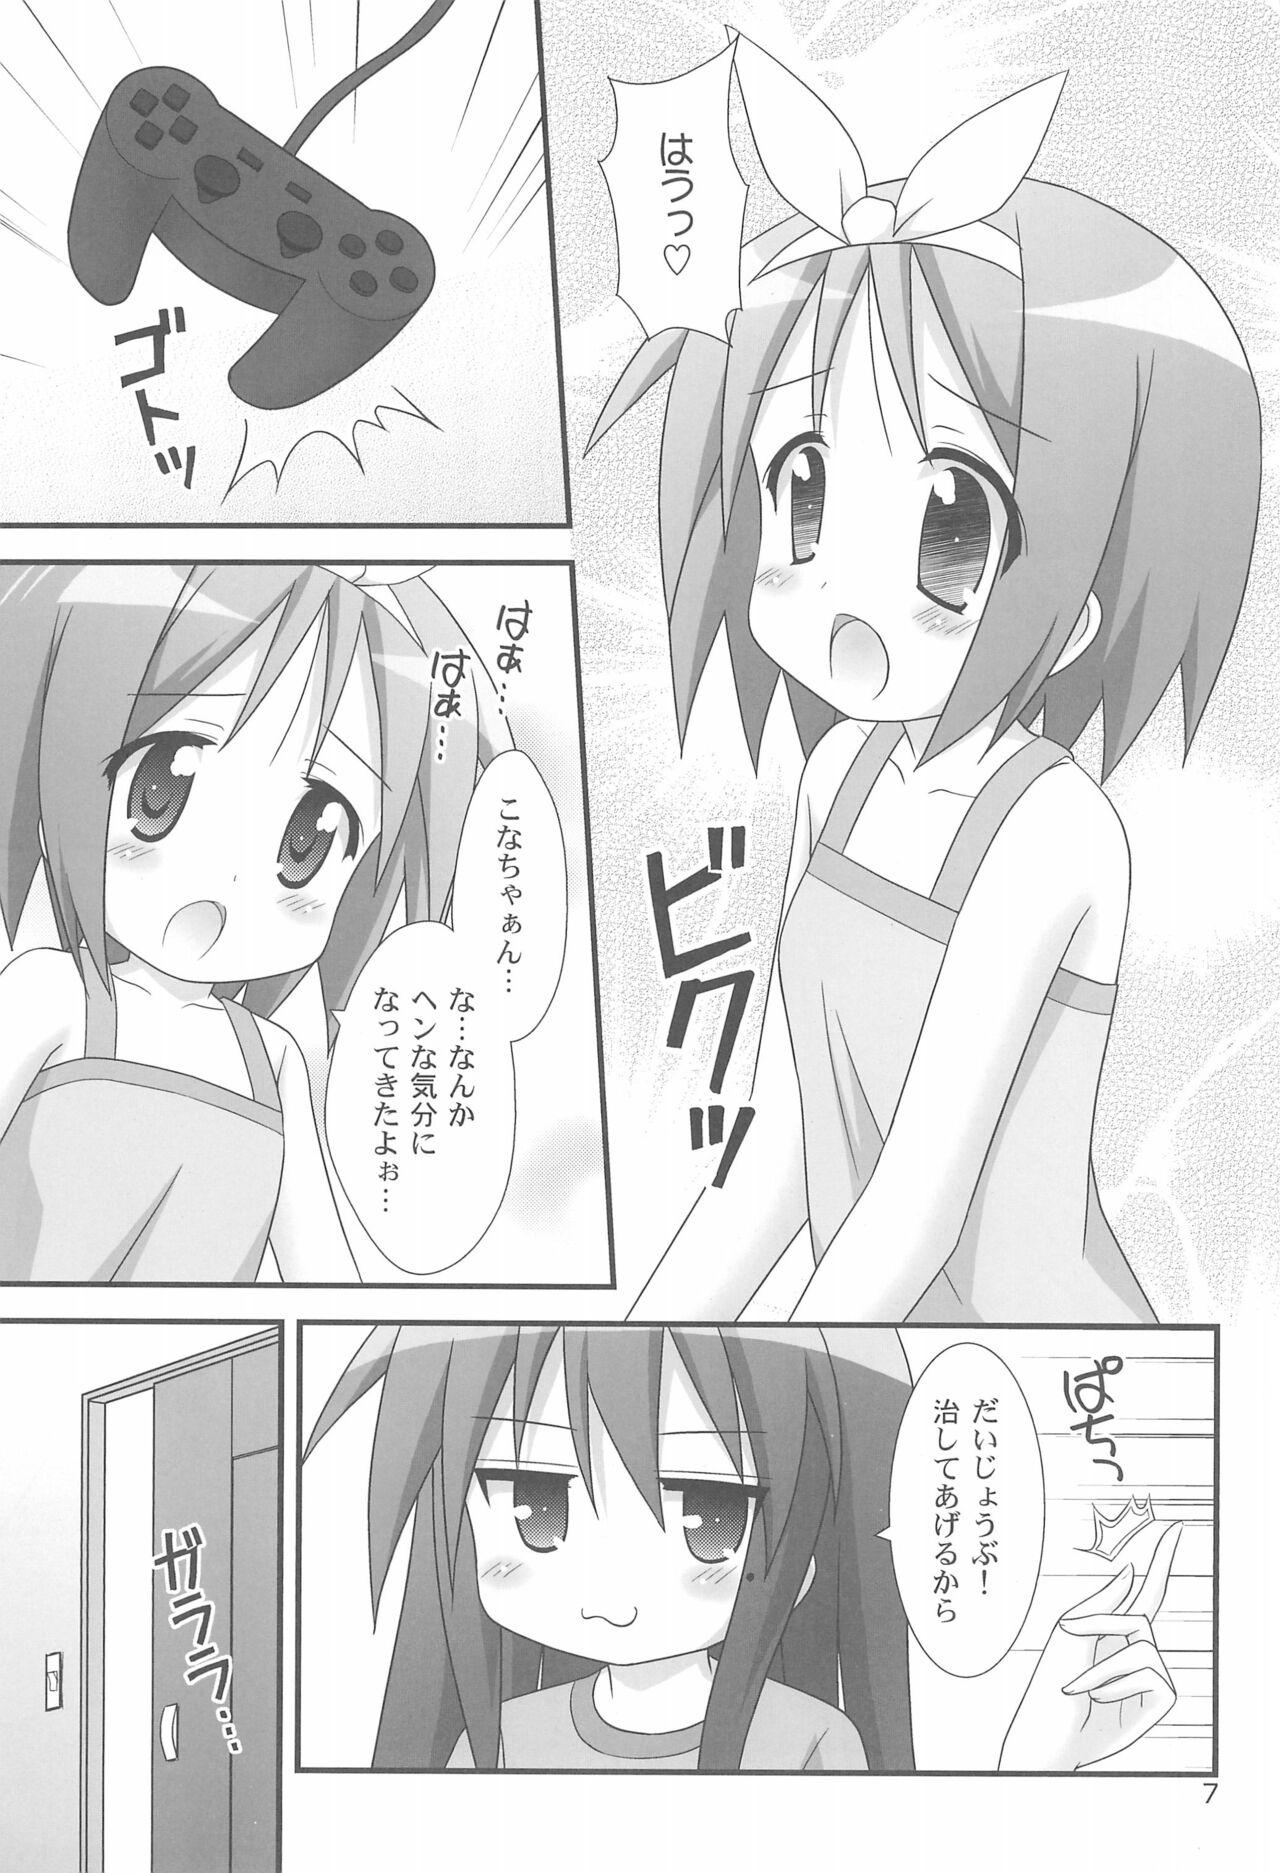 Squirting Love Choco - Lucky star Babes - Page 7